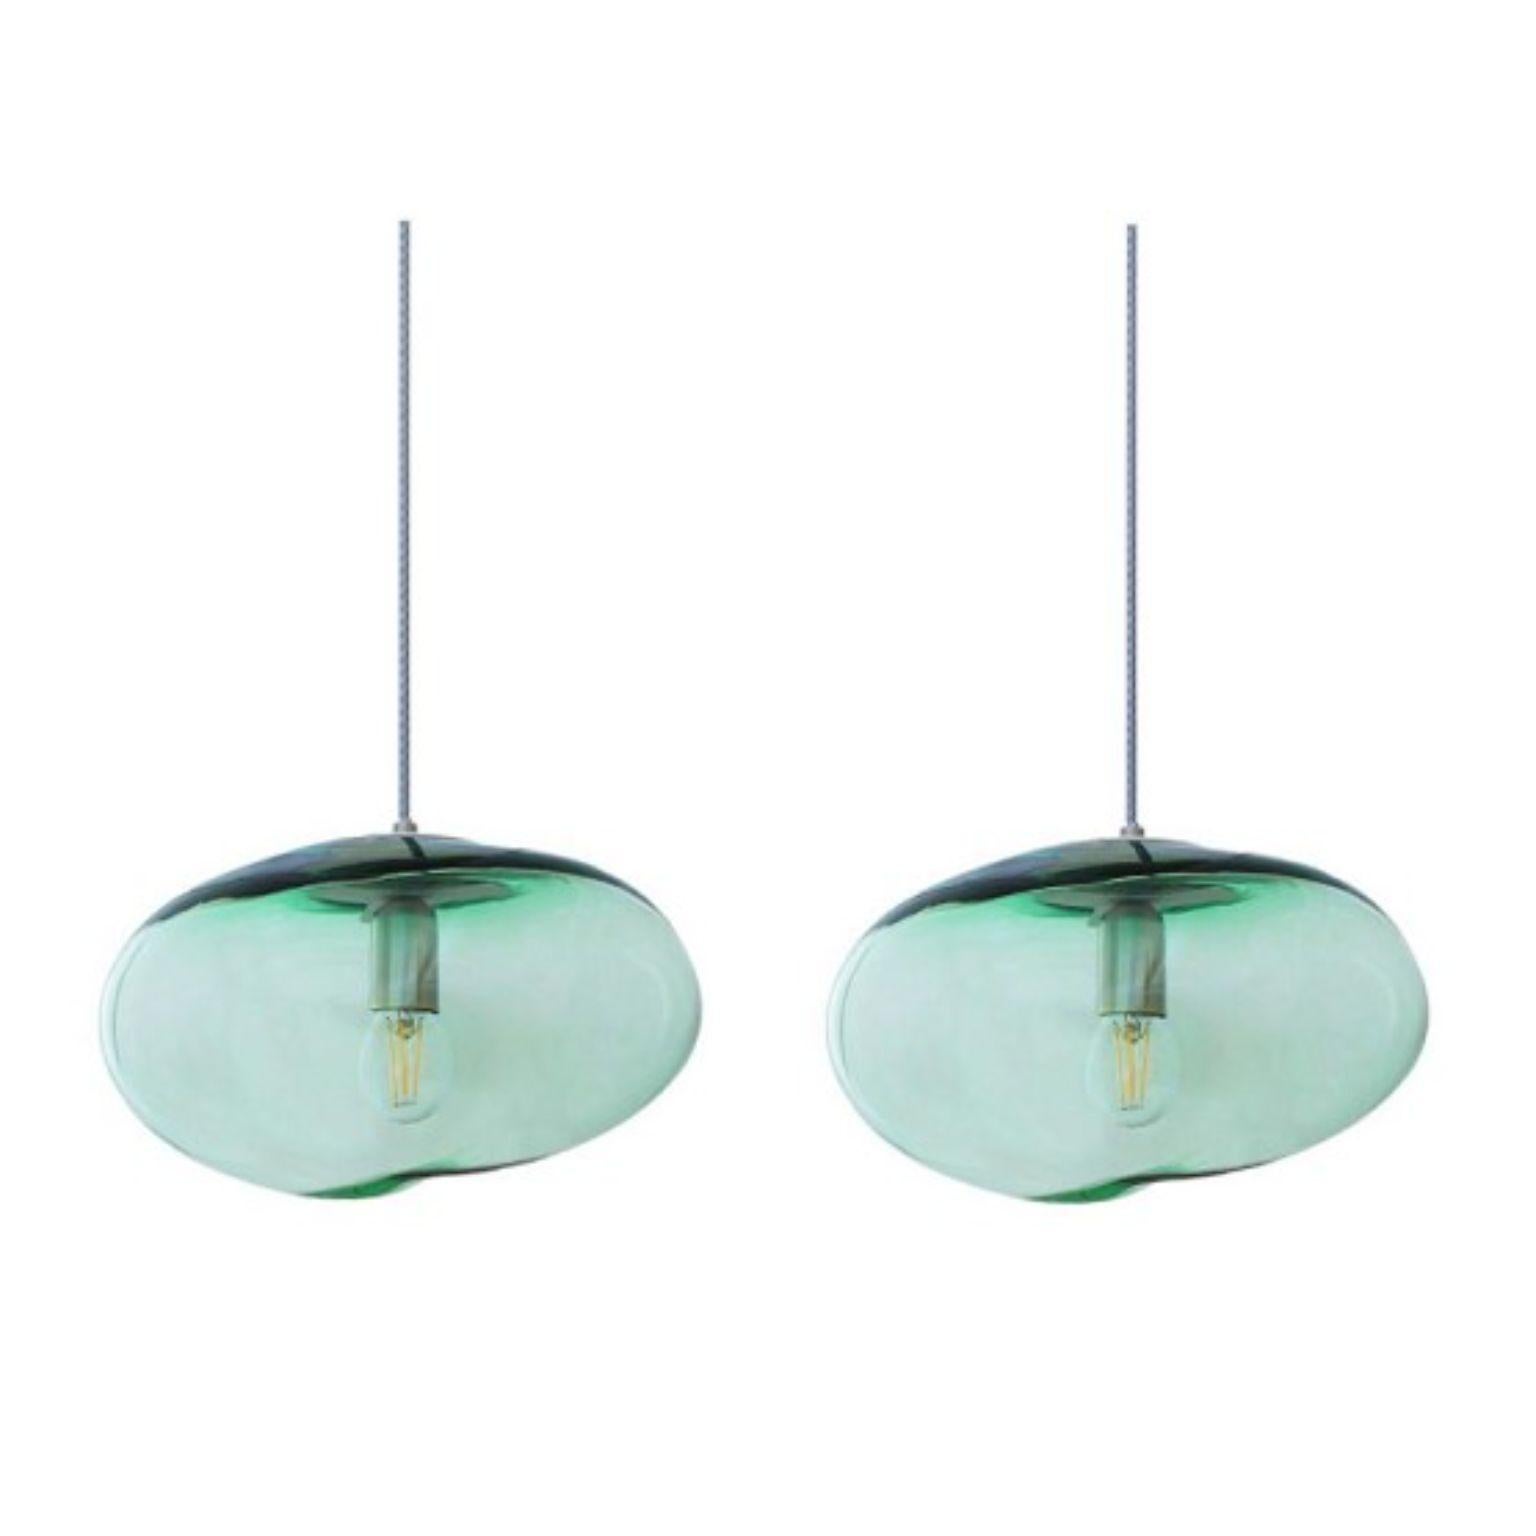 Set of 2 Planetoide green iridescent pendants by Eloa.
No UL listed 
Material: Glass, steel, silver, LED bulb
Dimensions: D30 x W30 x H250 cm
Also available in different colours and dimensions.

All our lamps can be wired according to each country.